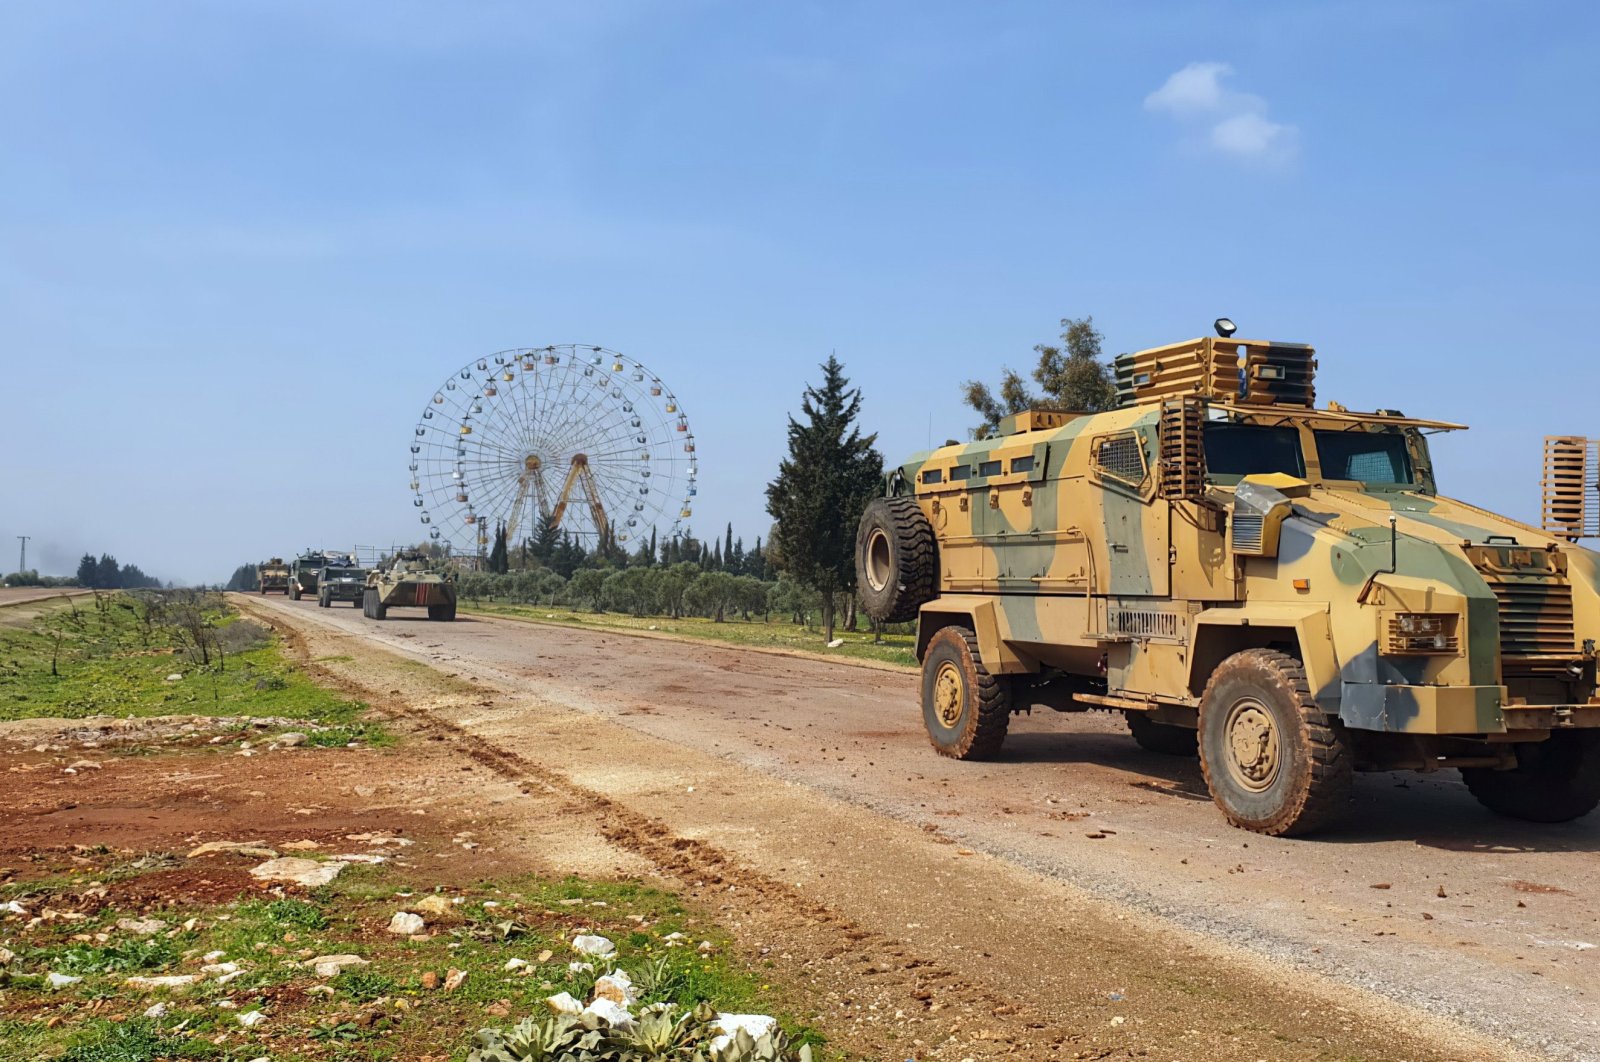 Turkish and Russian troops patrol on the M4 highway, which runs east-west through Idlib province, Syria, March 15, 2020. (AP Photo)